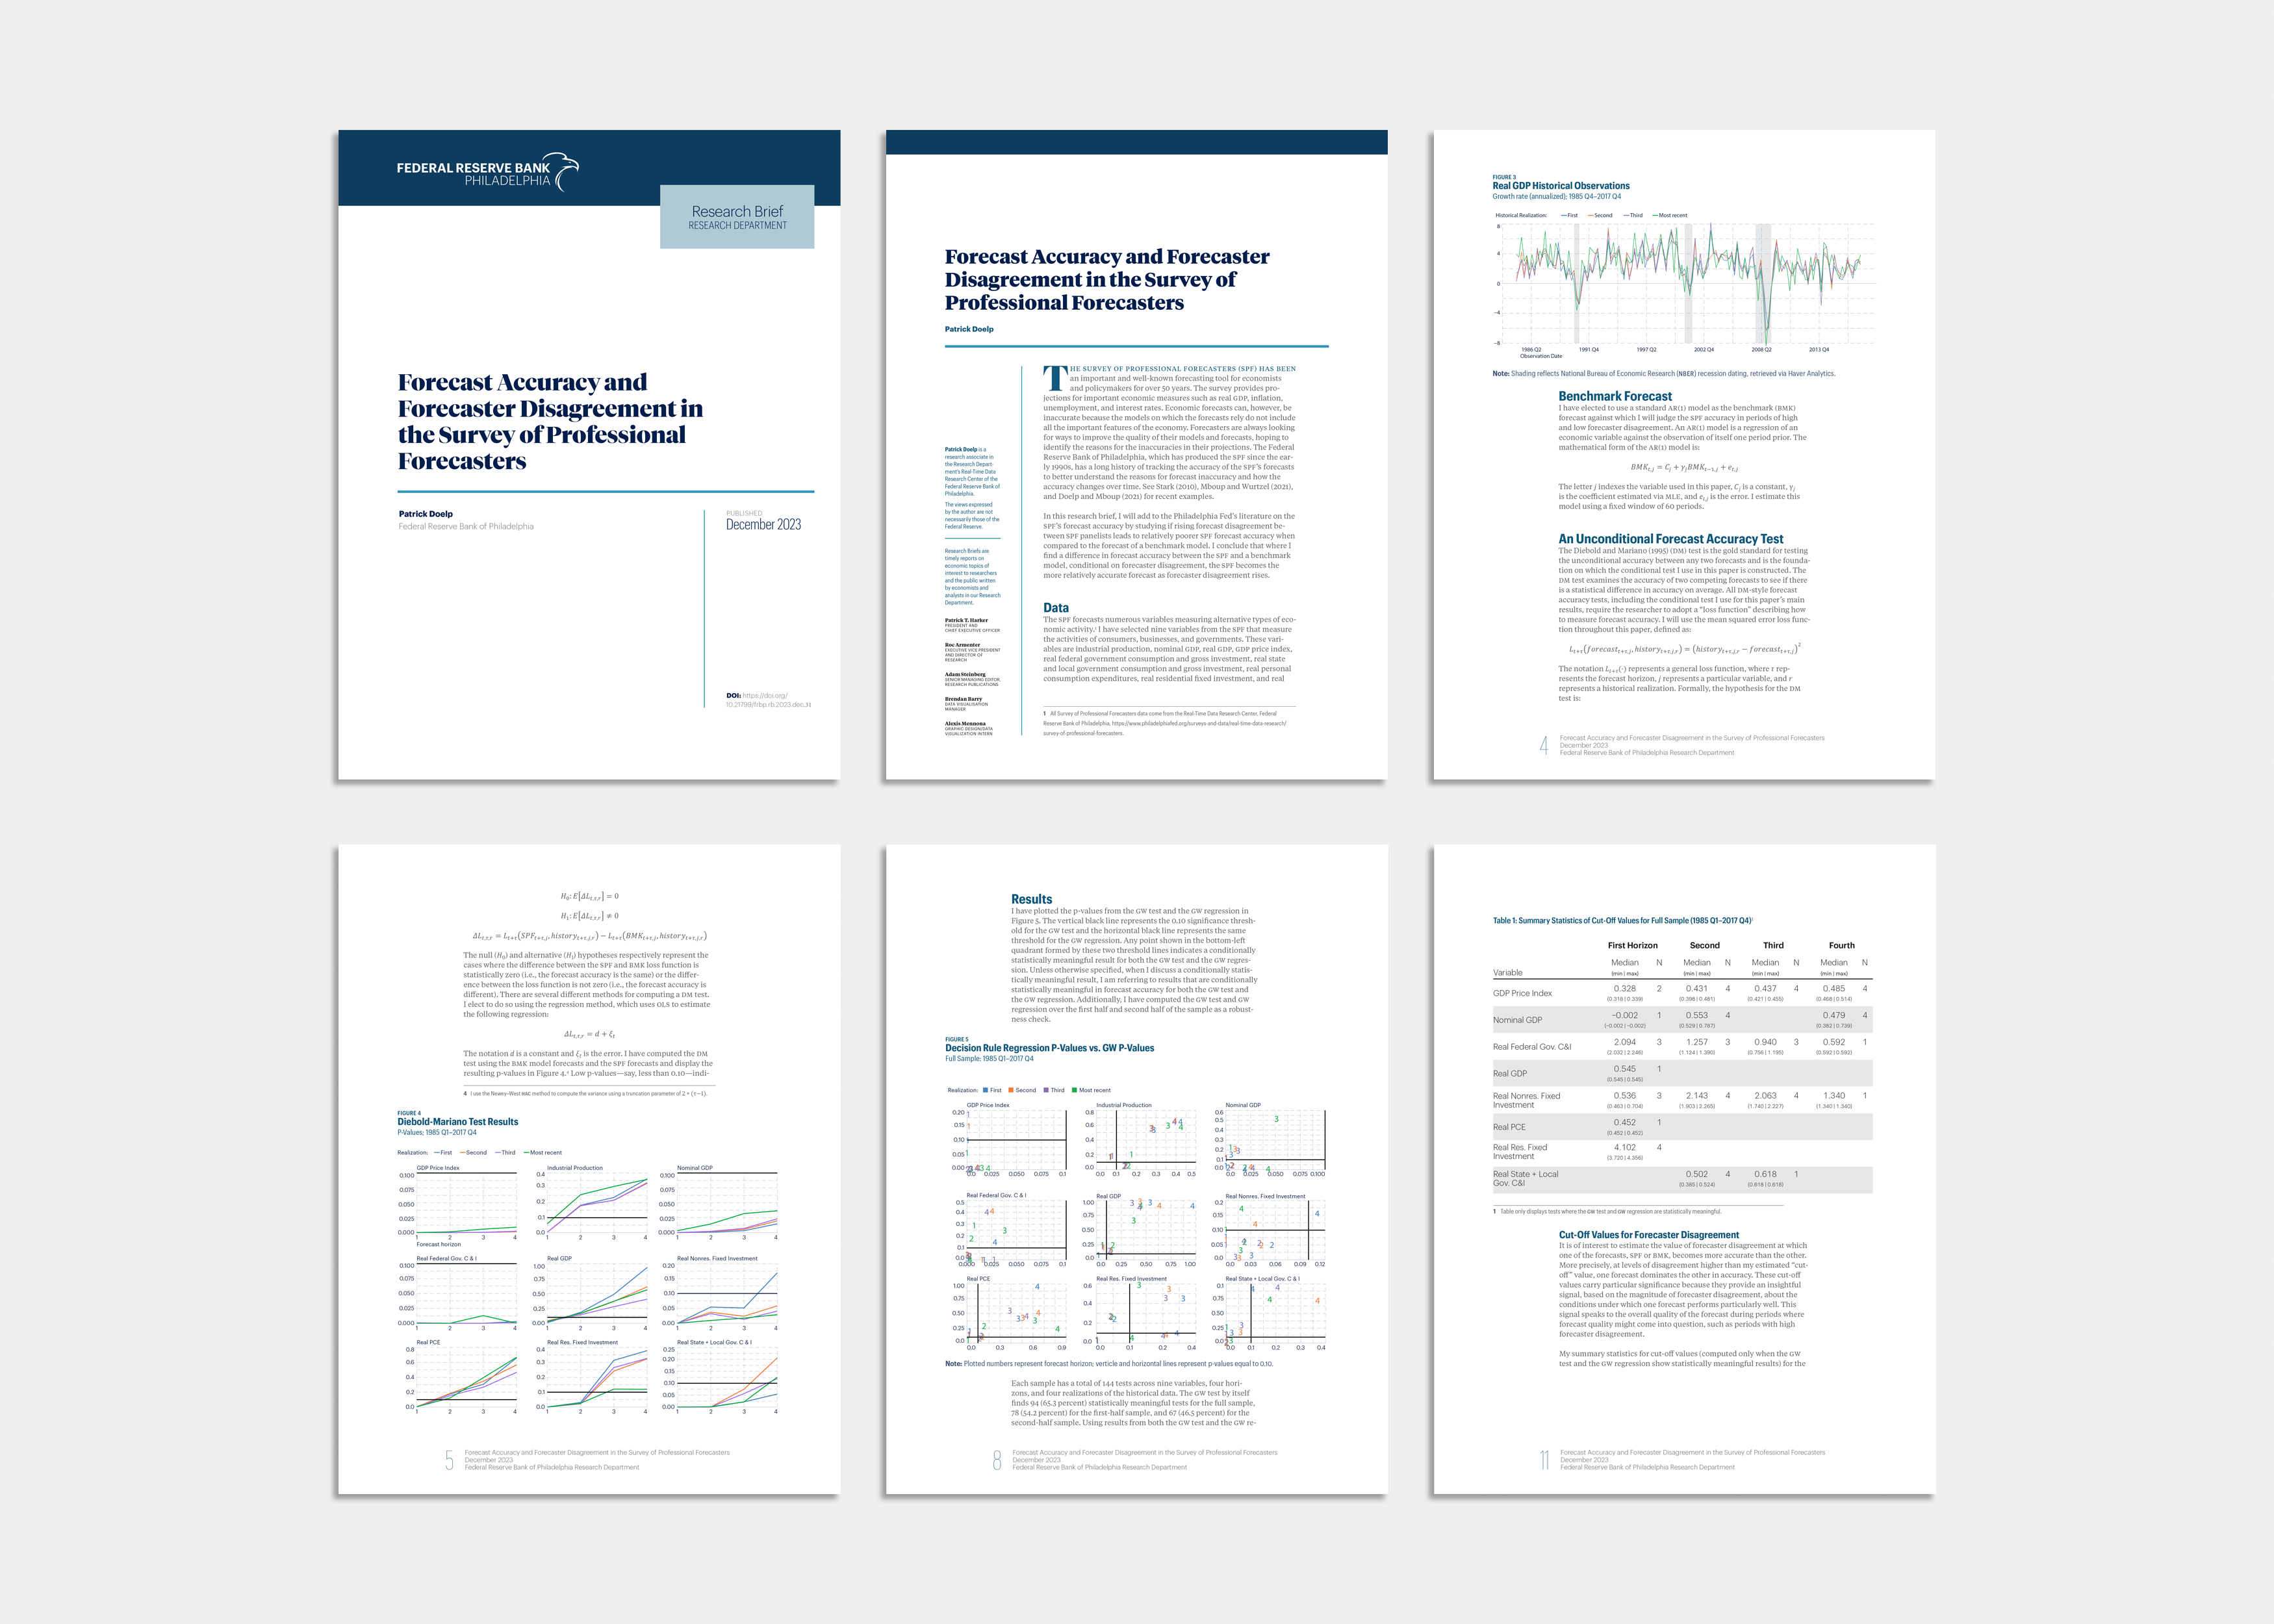 Selection of pages from the Survey of Professional Forecasters Forecast Research Brief